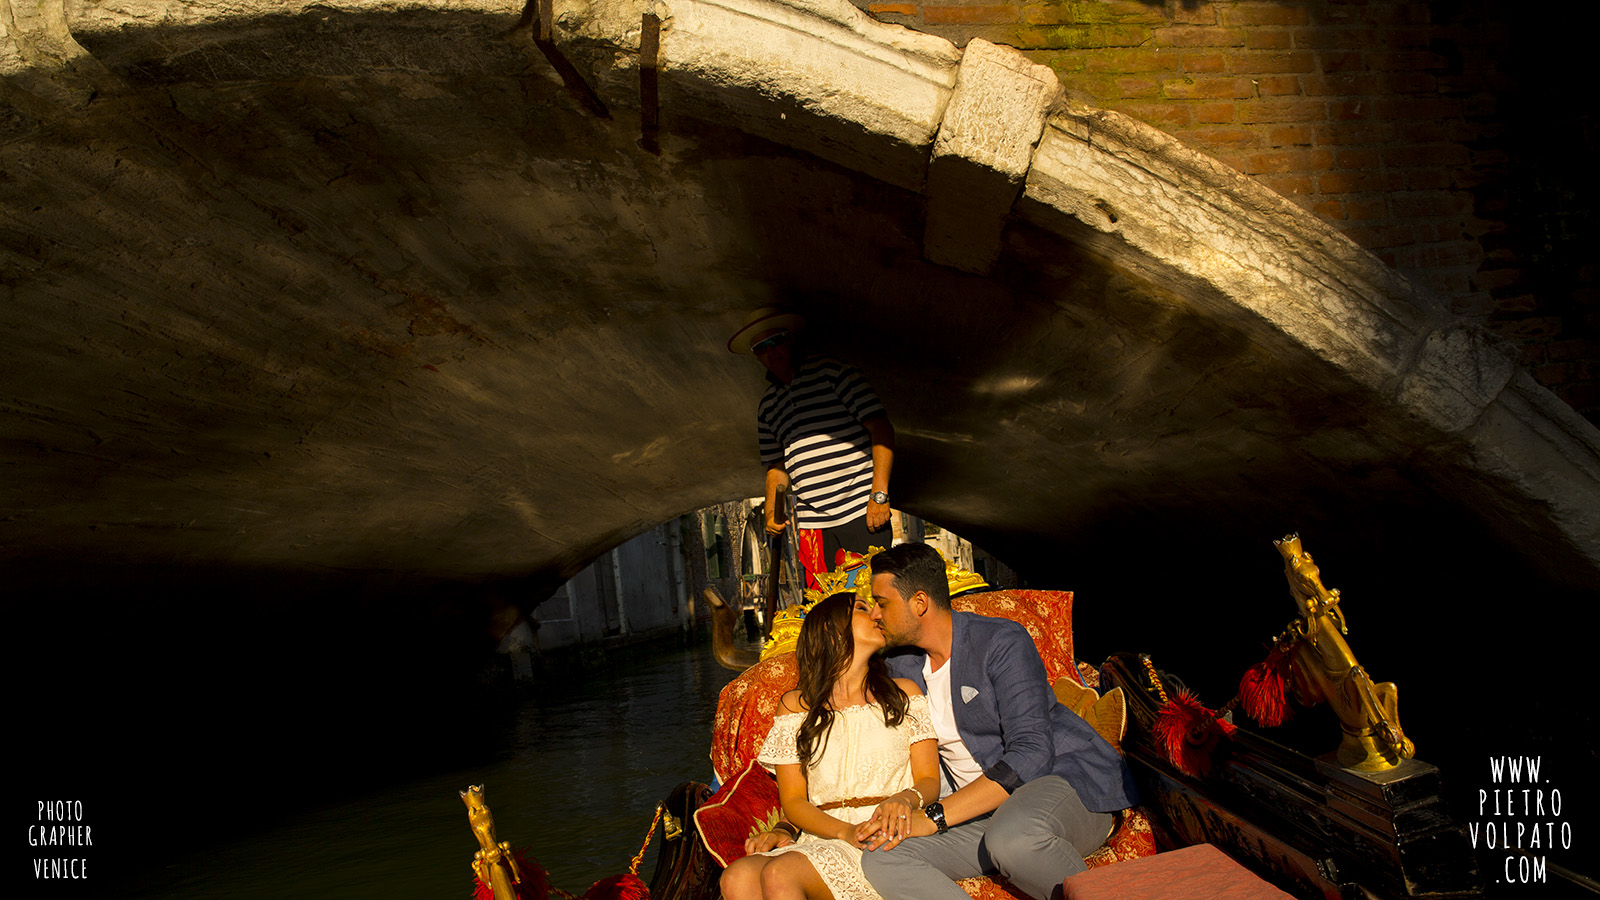 photographer in venice for couple pre wedding photoshoot romantic vacation tour pictures